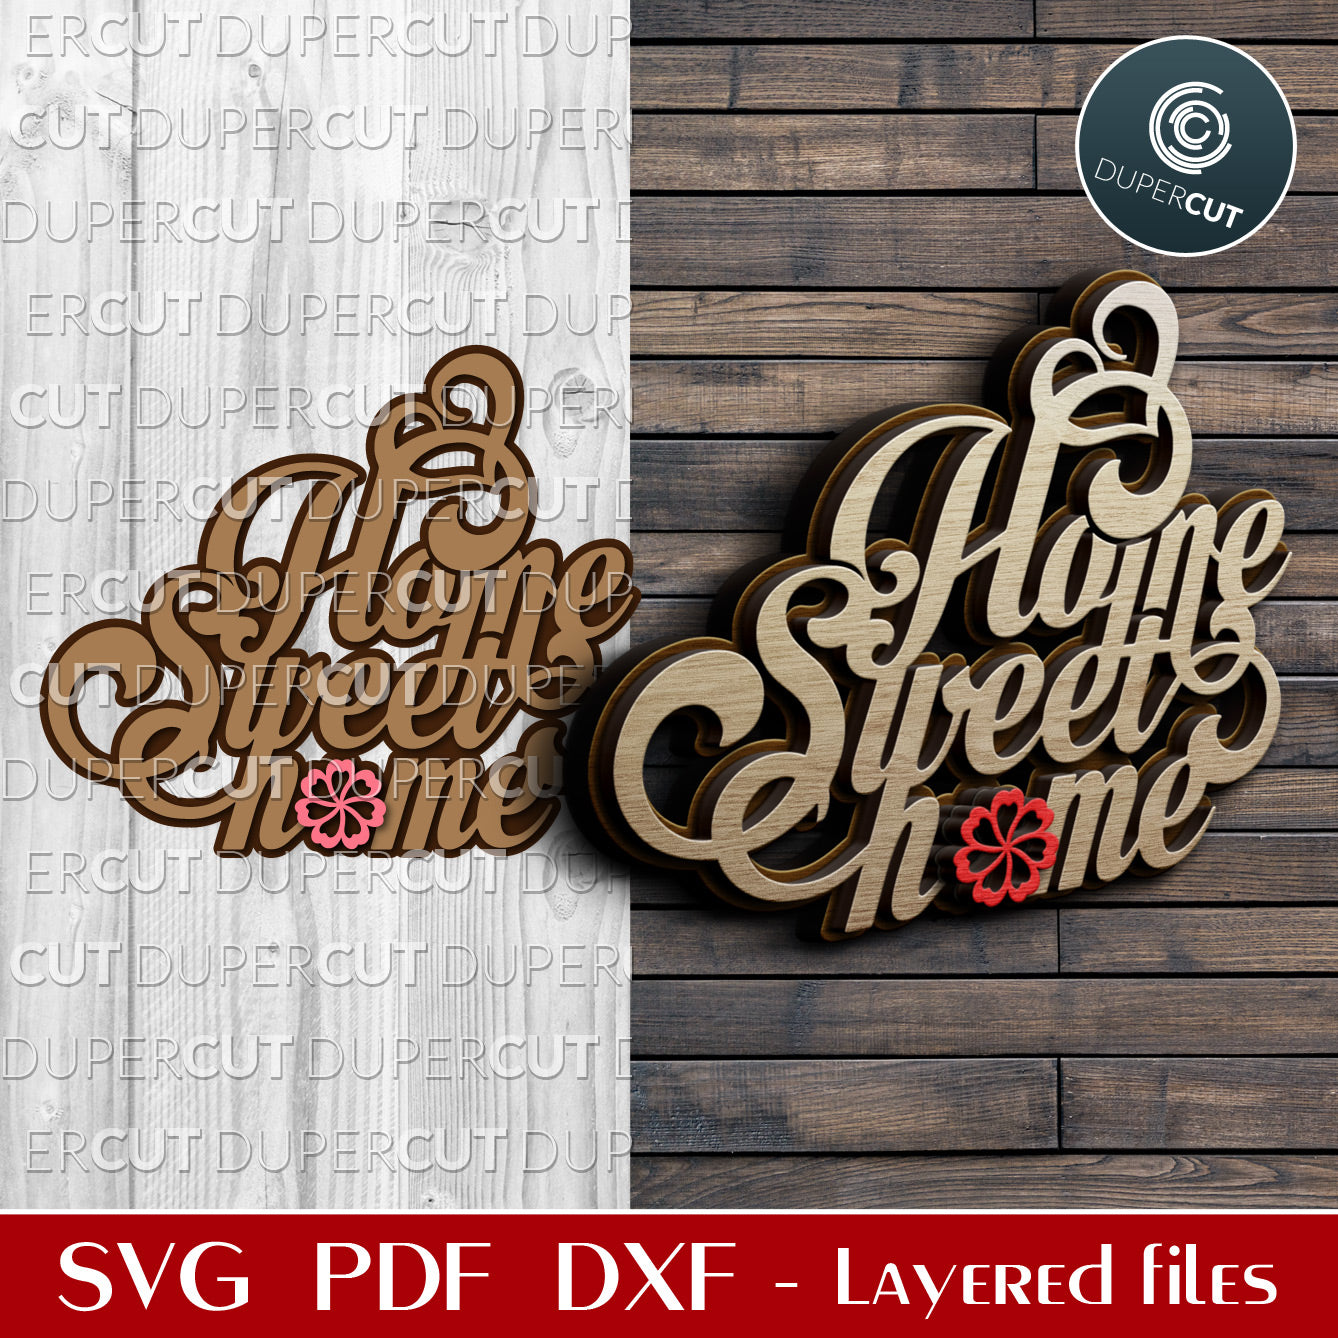 Home Sweet Home sign - SVG PDF DXF layered laser cutting files for Glowforge, Cricut, Silhouette Cameo, CNC Plasma machines